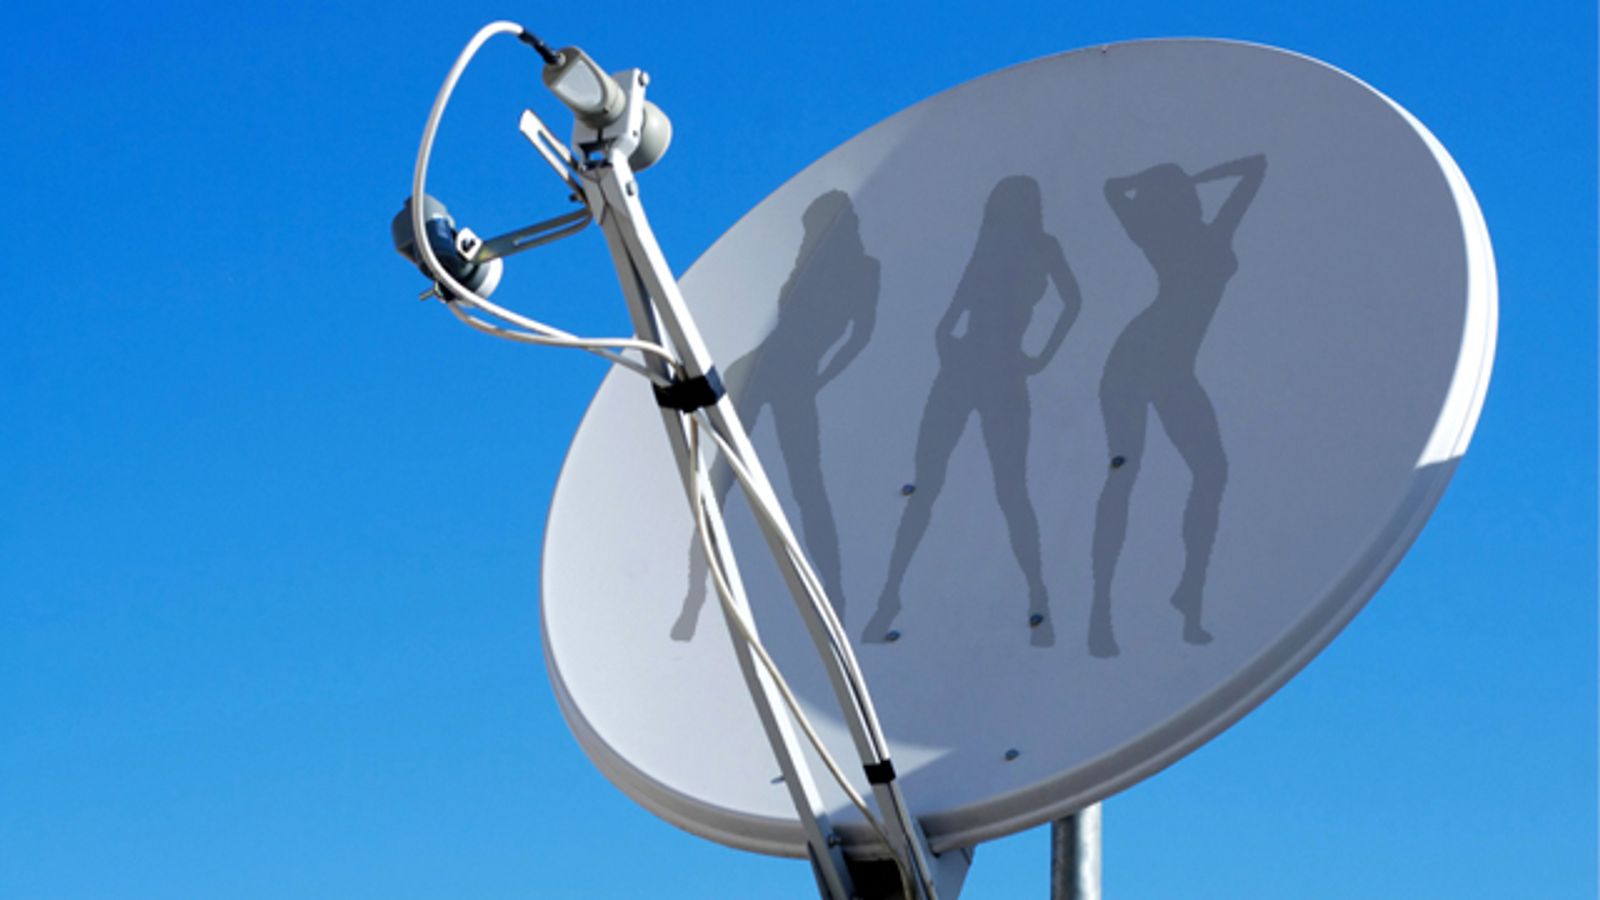 Satellite TV and Cable Services to Promote PPV Porn in the Wee Hours